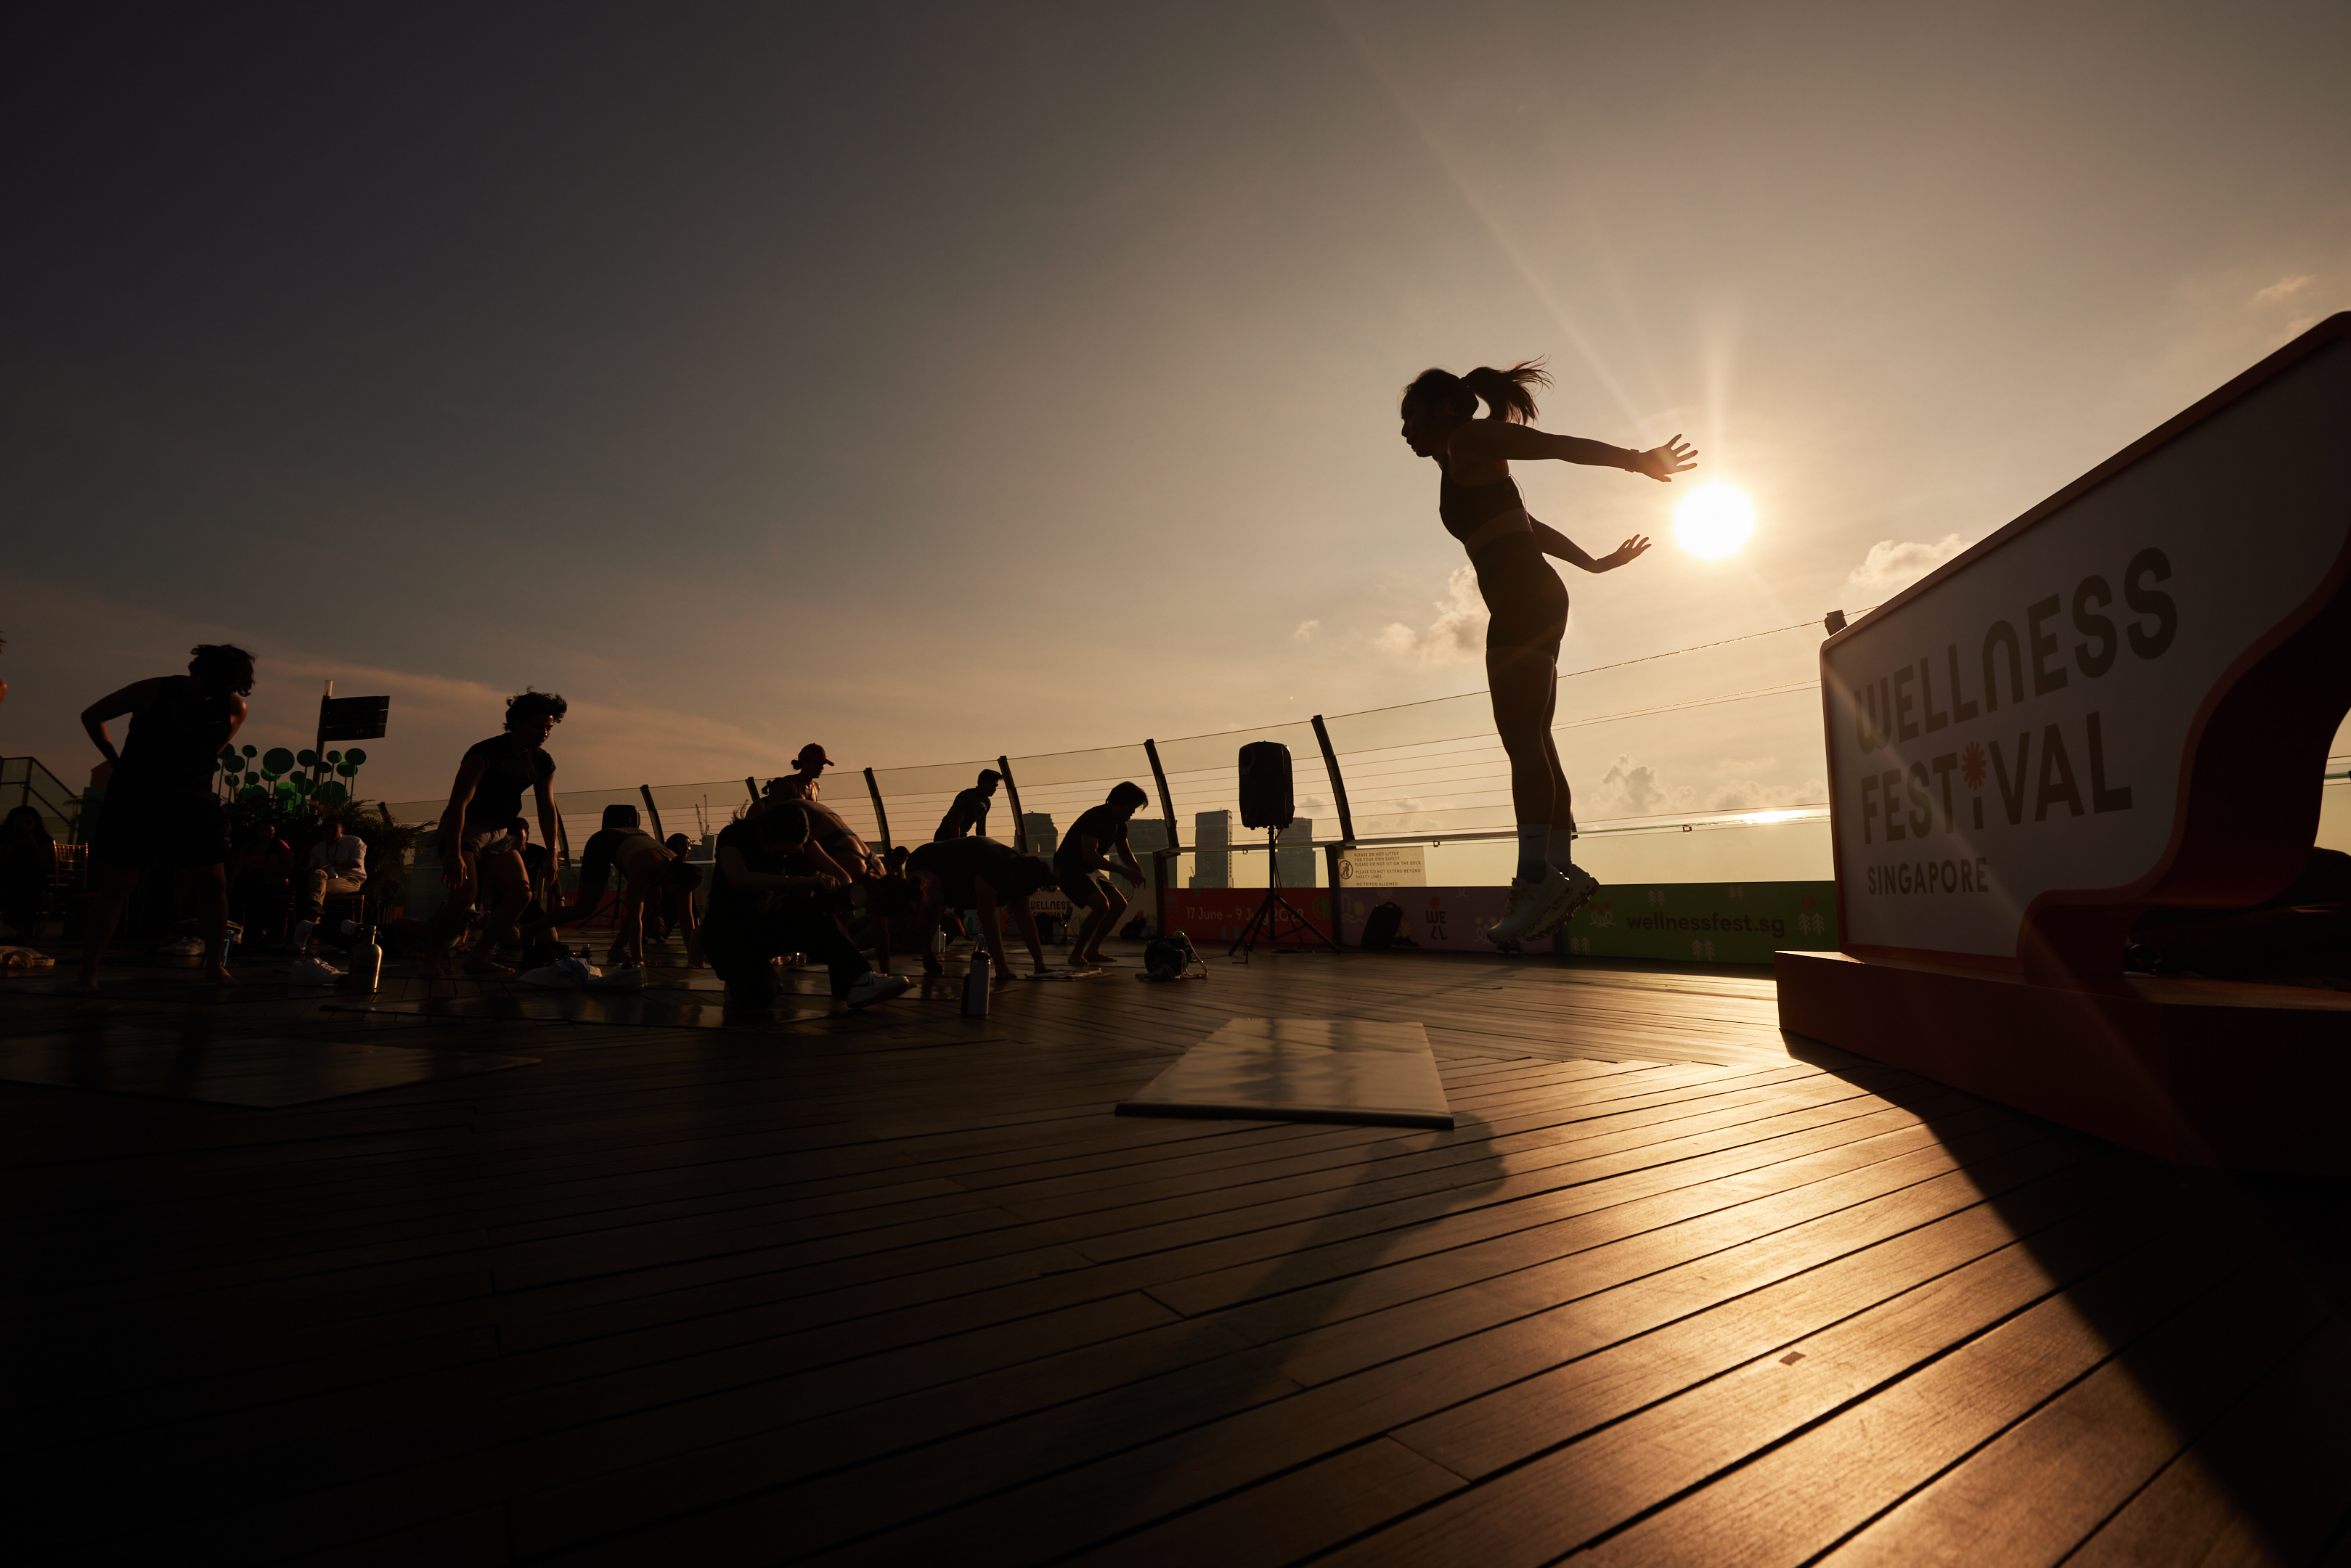 Enjoy both fitness and music through the Beats Performance Therapy workout 
at the MBS Event Plaza. 